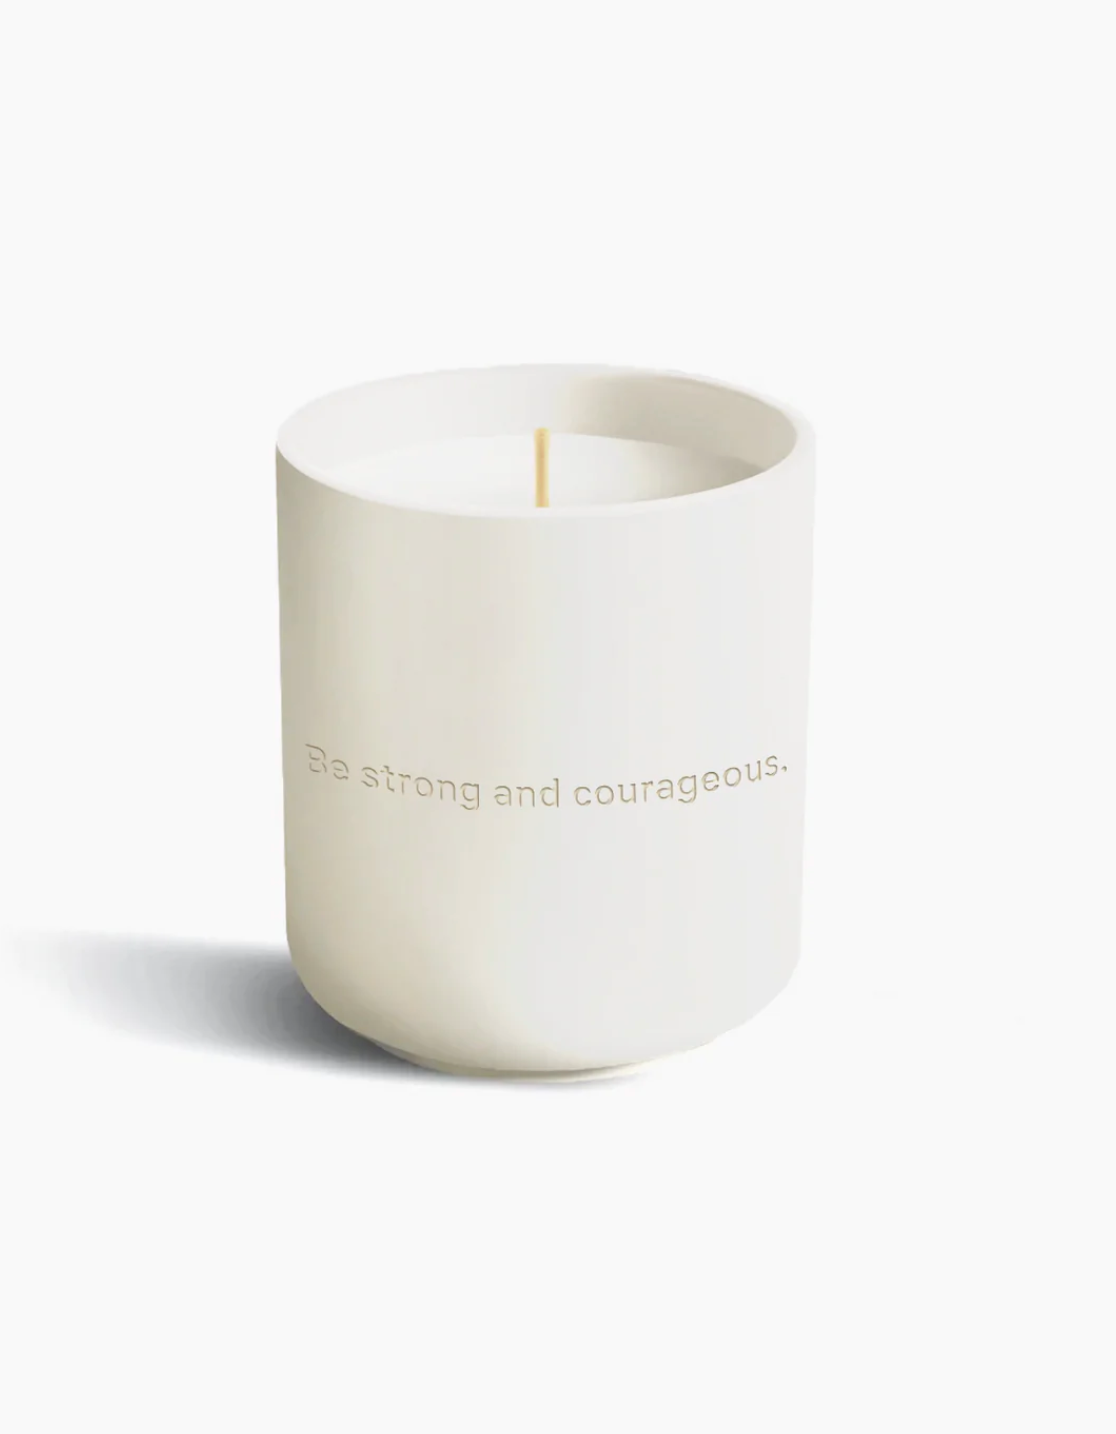 Musee: Strength Prayer Candle